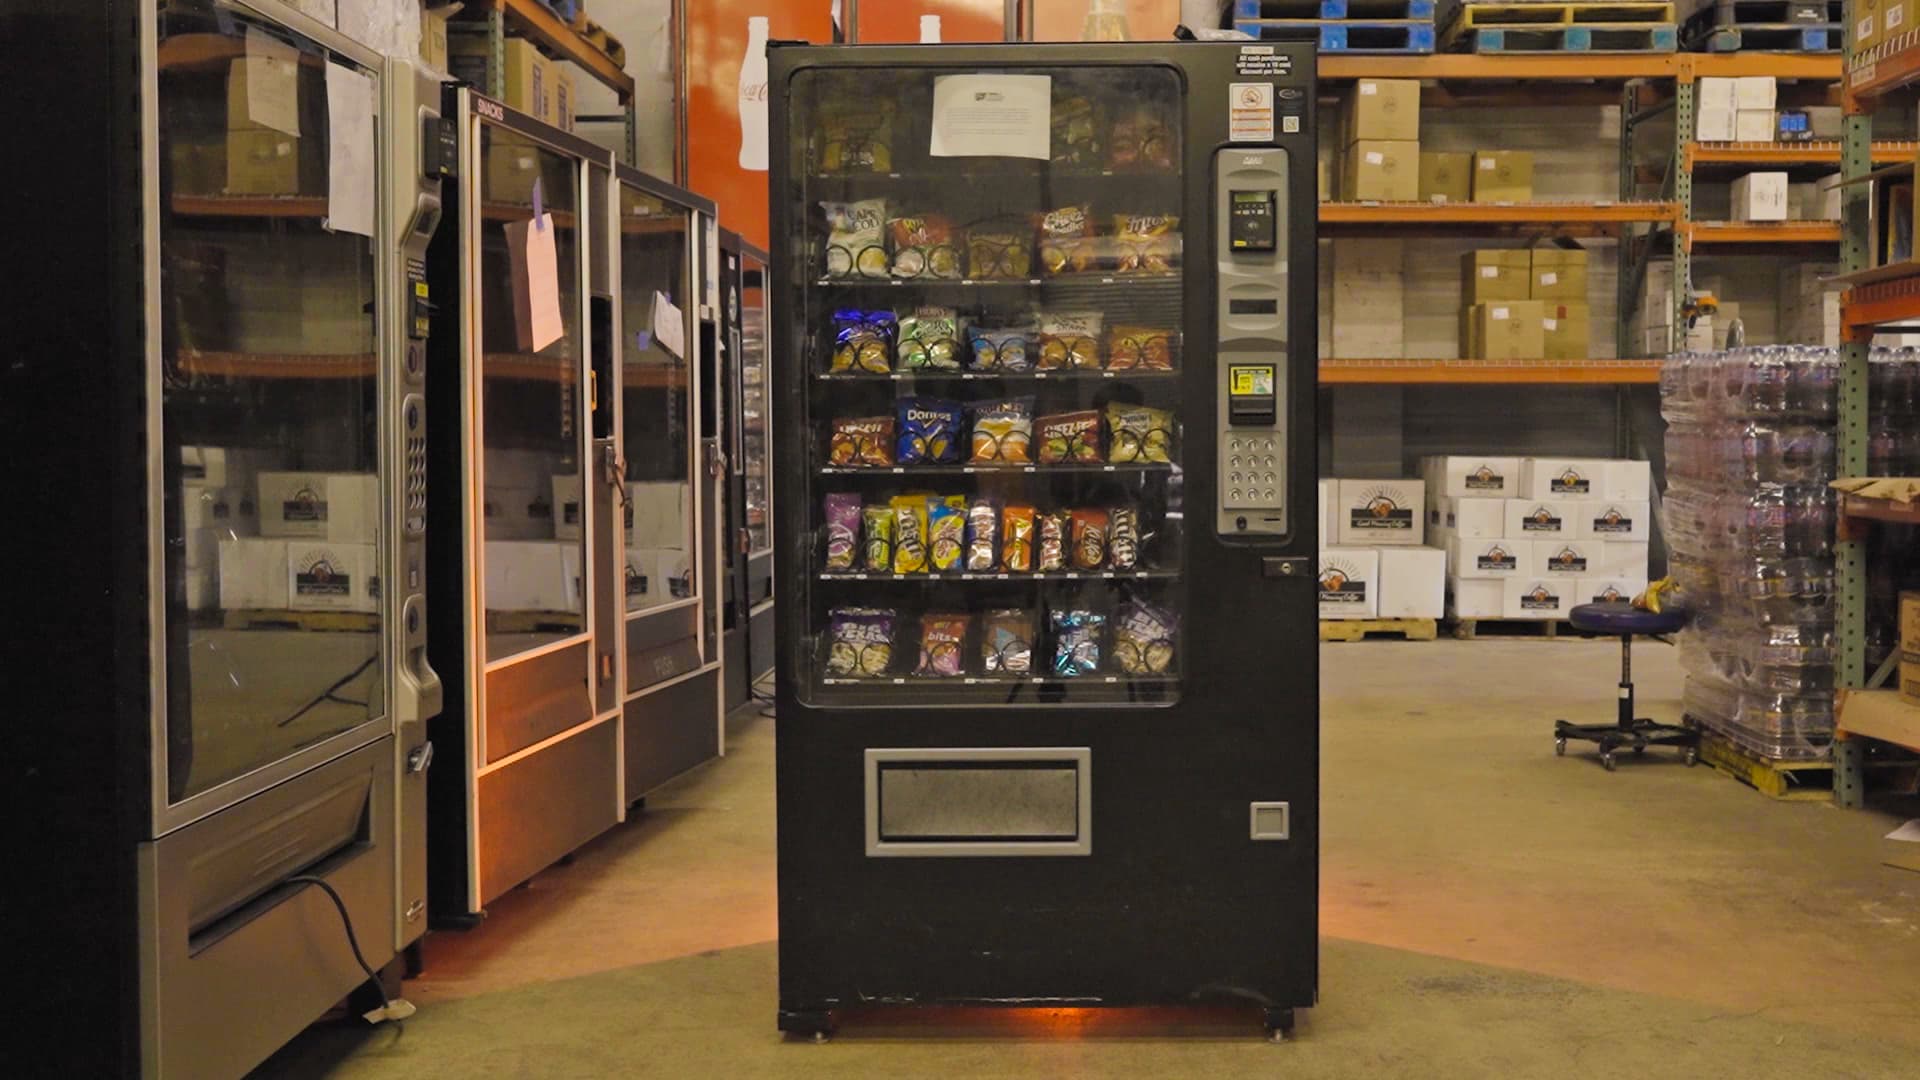 In the future, Gram hopes to open his own vending machine warehouse.